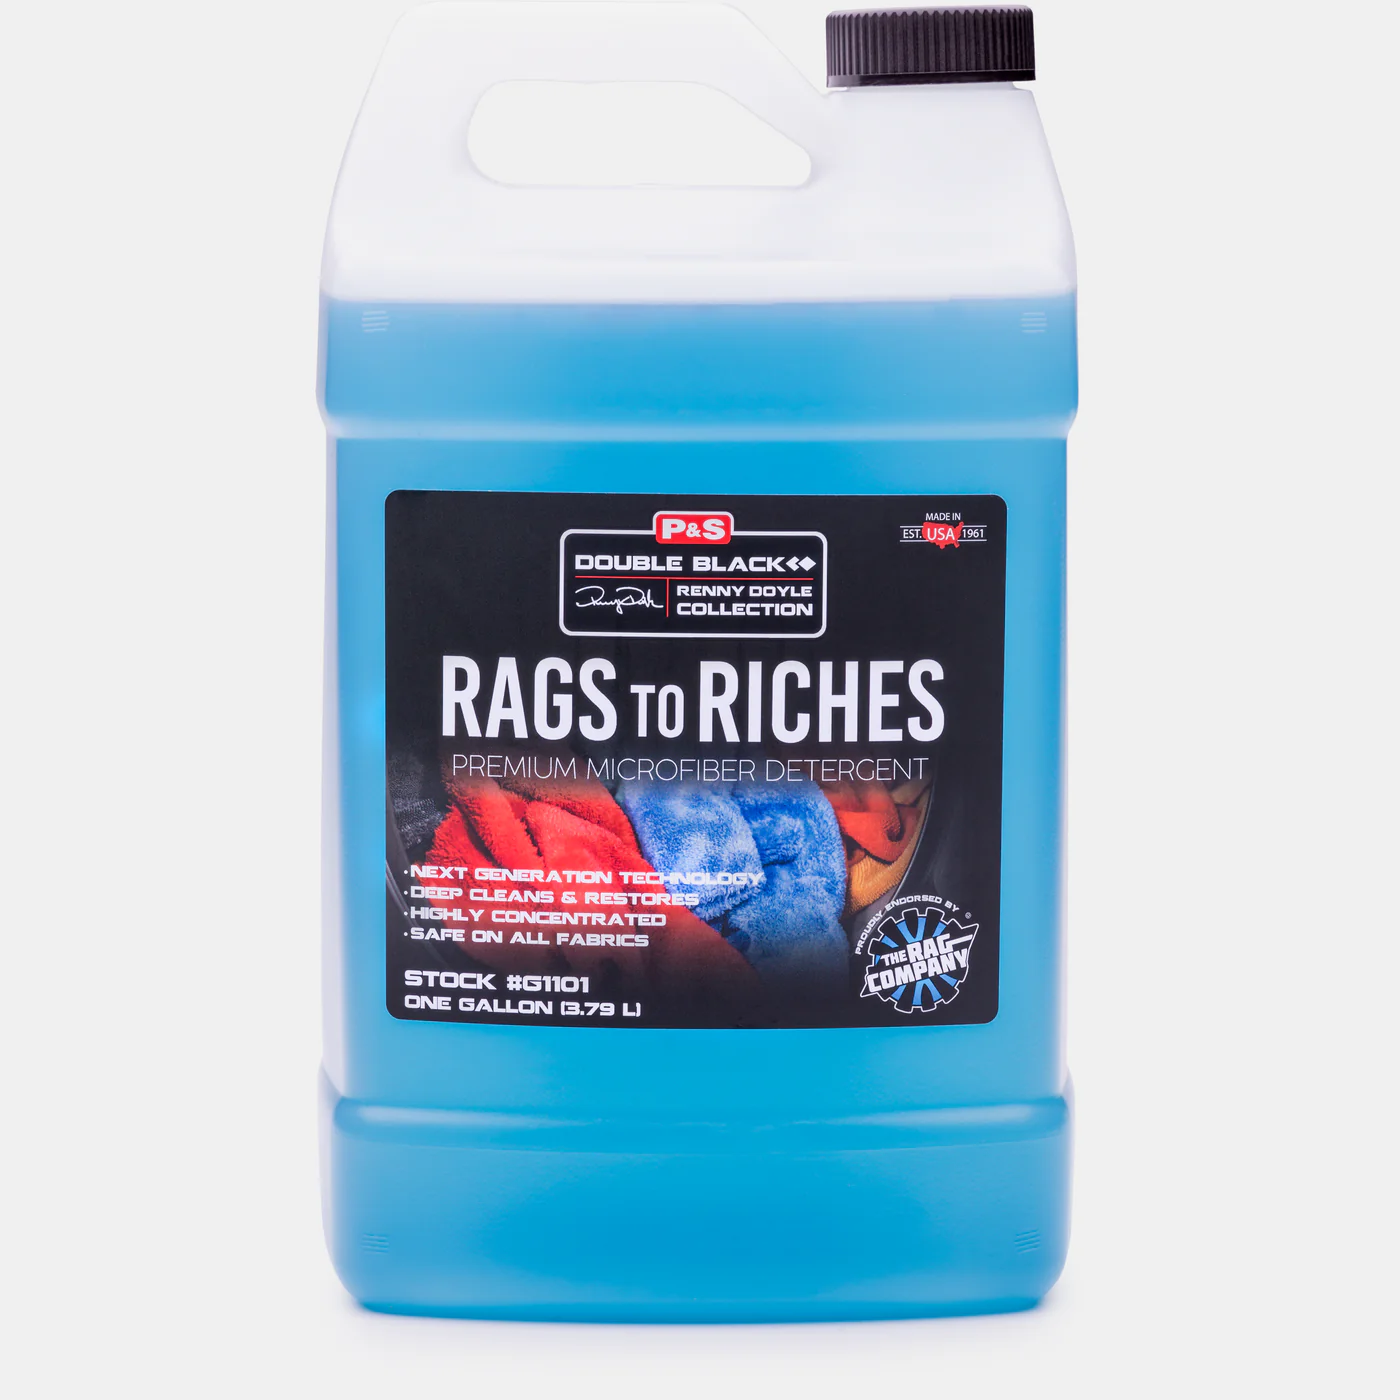 RAGS TO RICHES - MICROFIBER DETERGENT